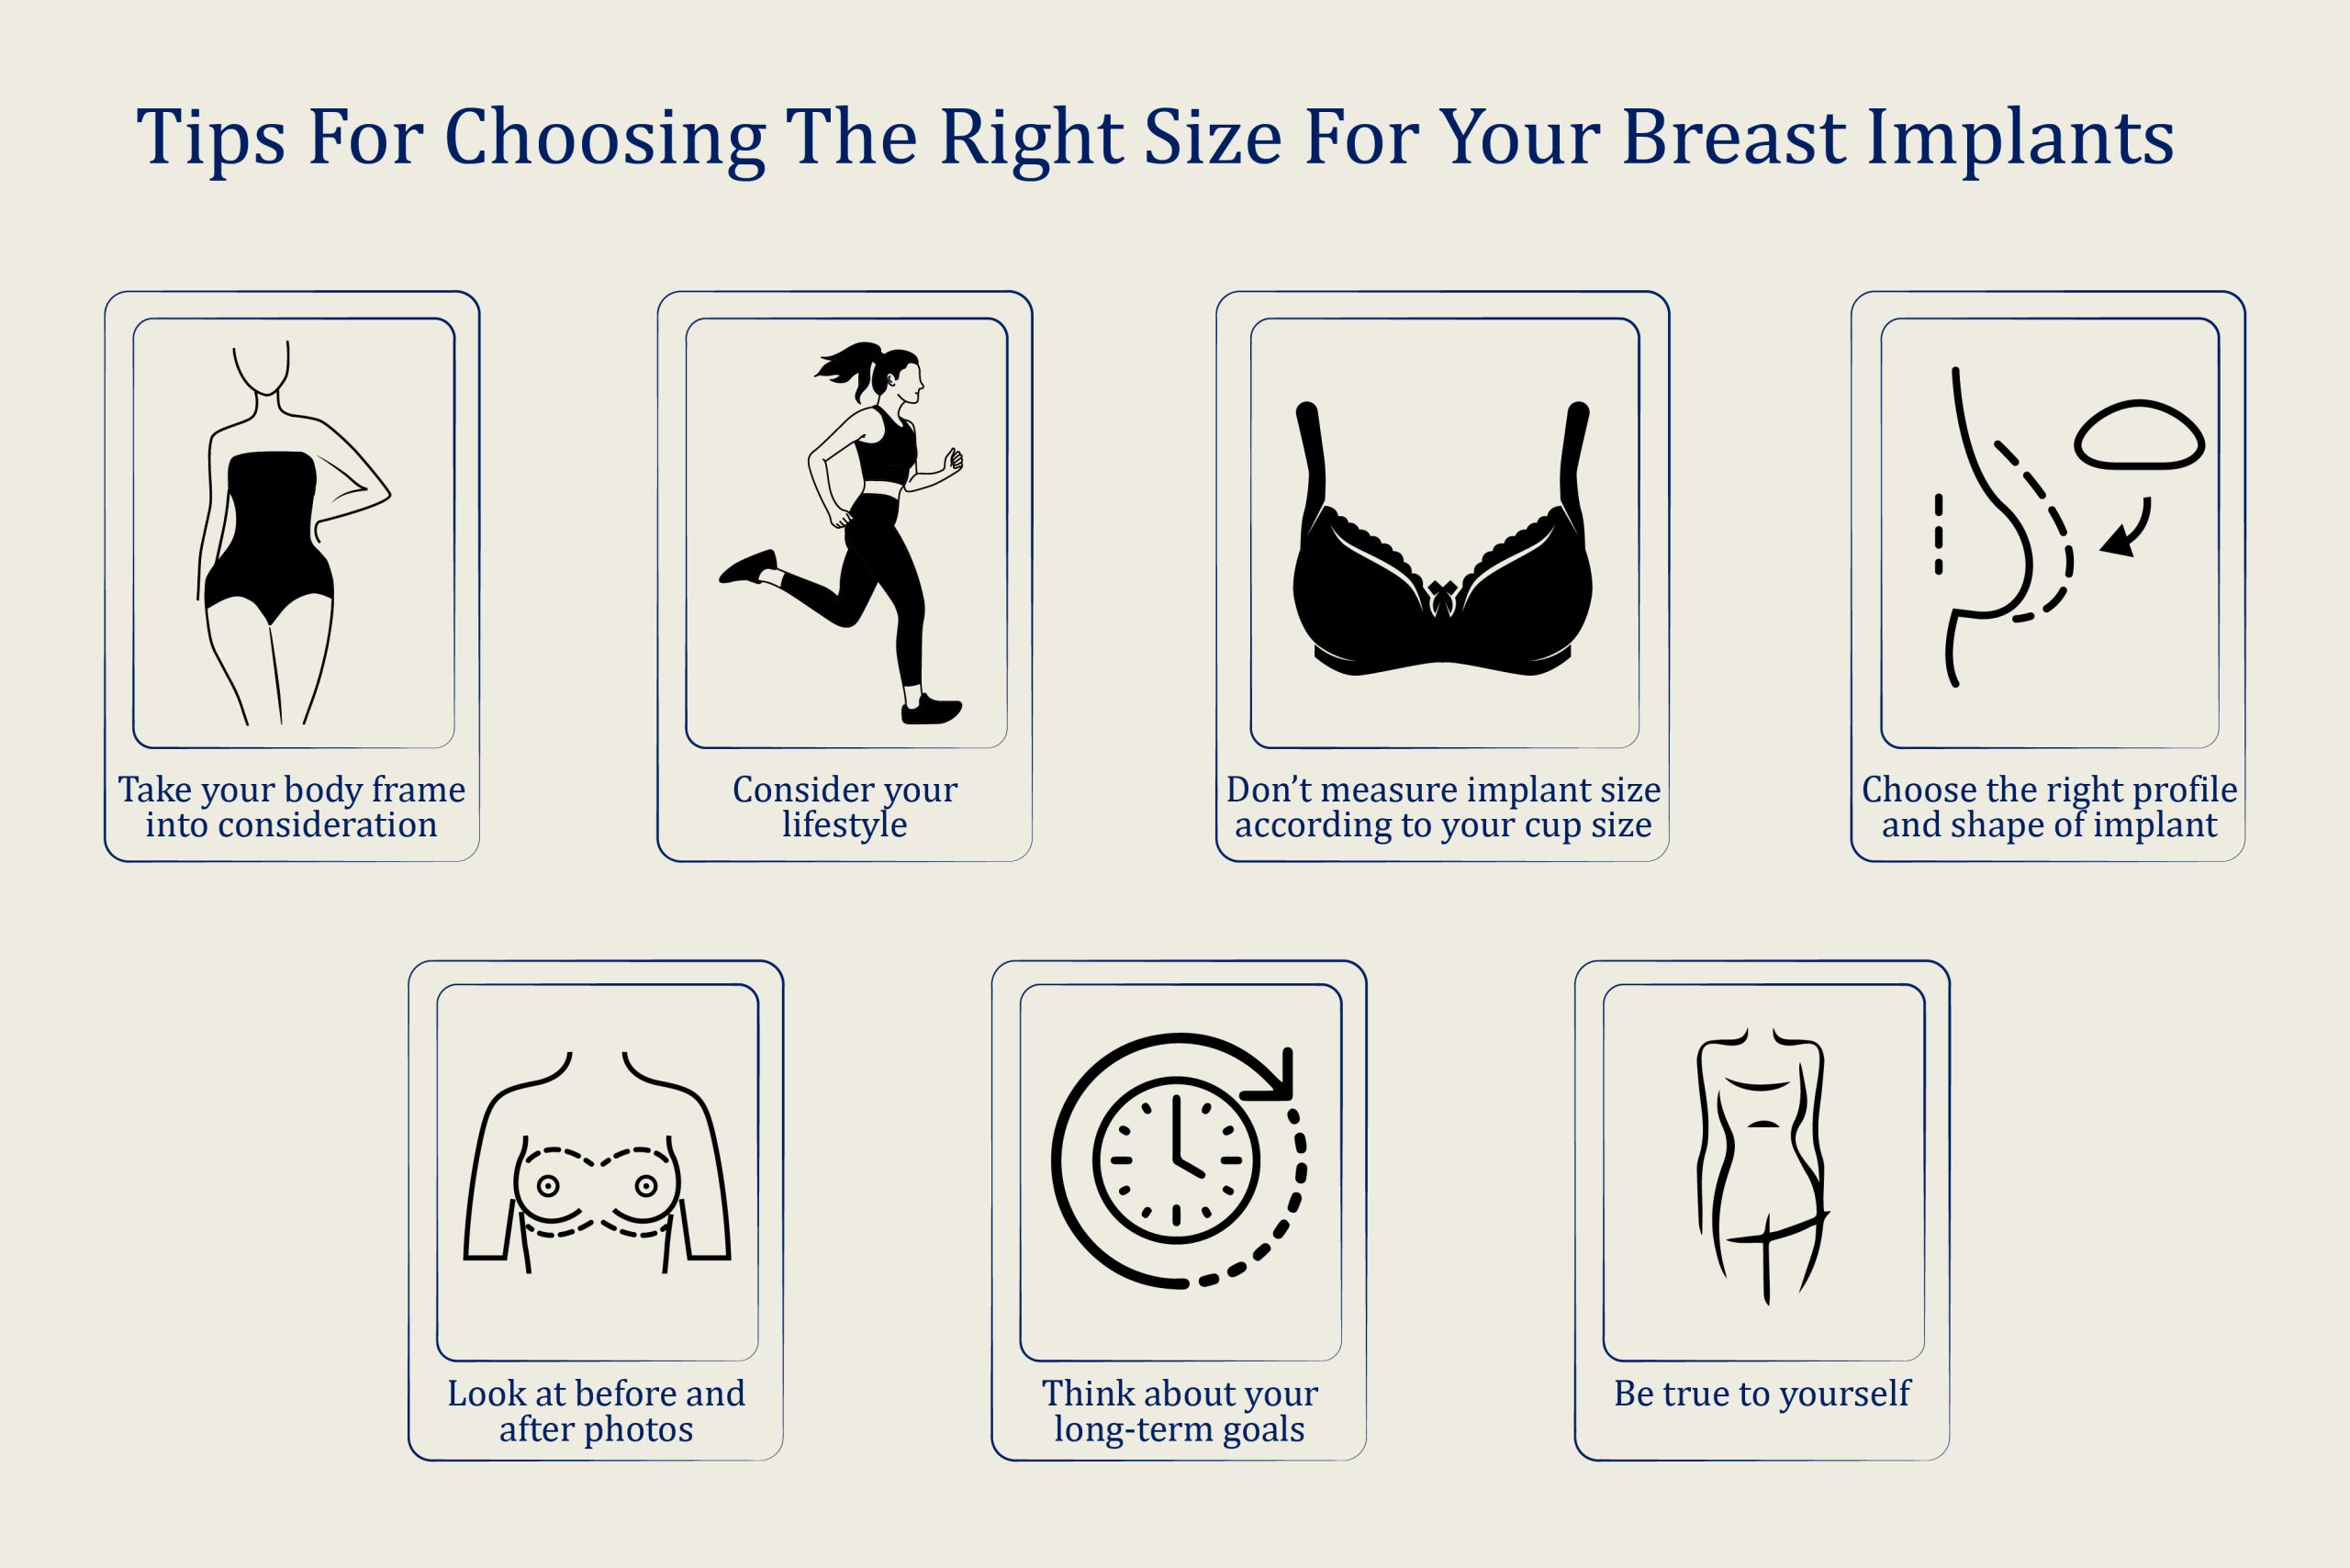 Tips in Choosing The Right Size For Your Breast Implants